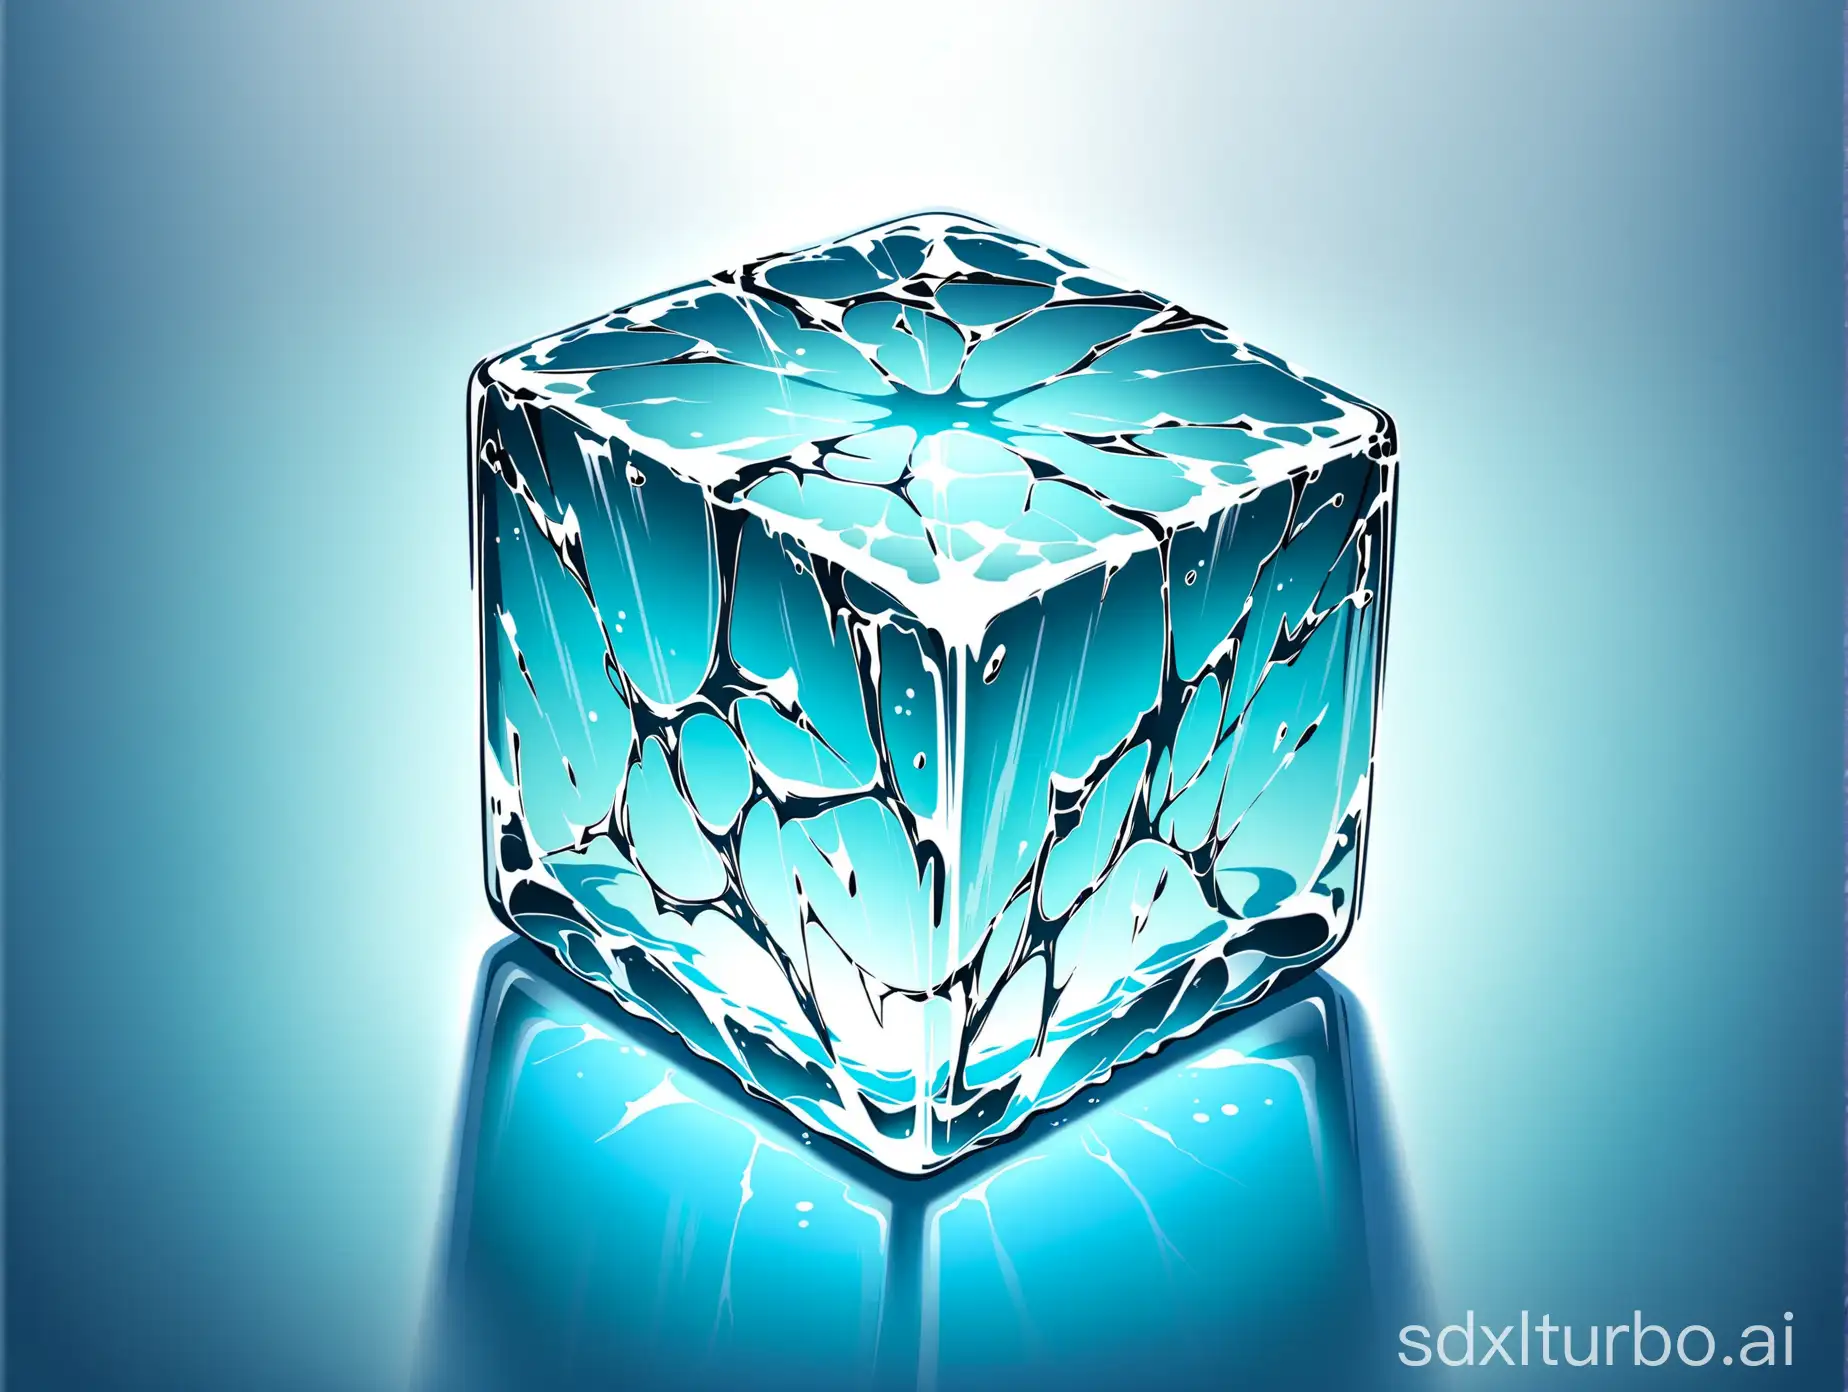 Cracked-Ice-Cube-with-Intricate-Fractures